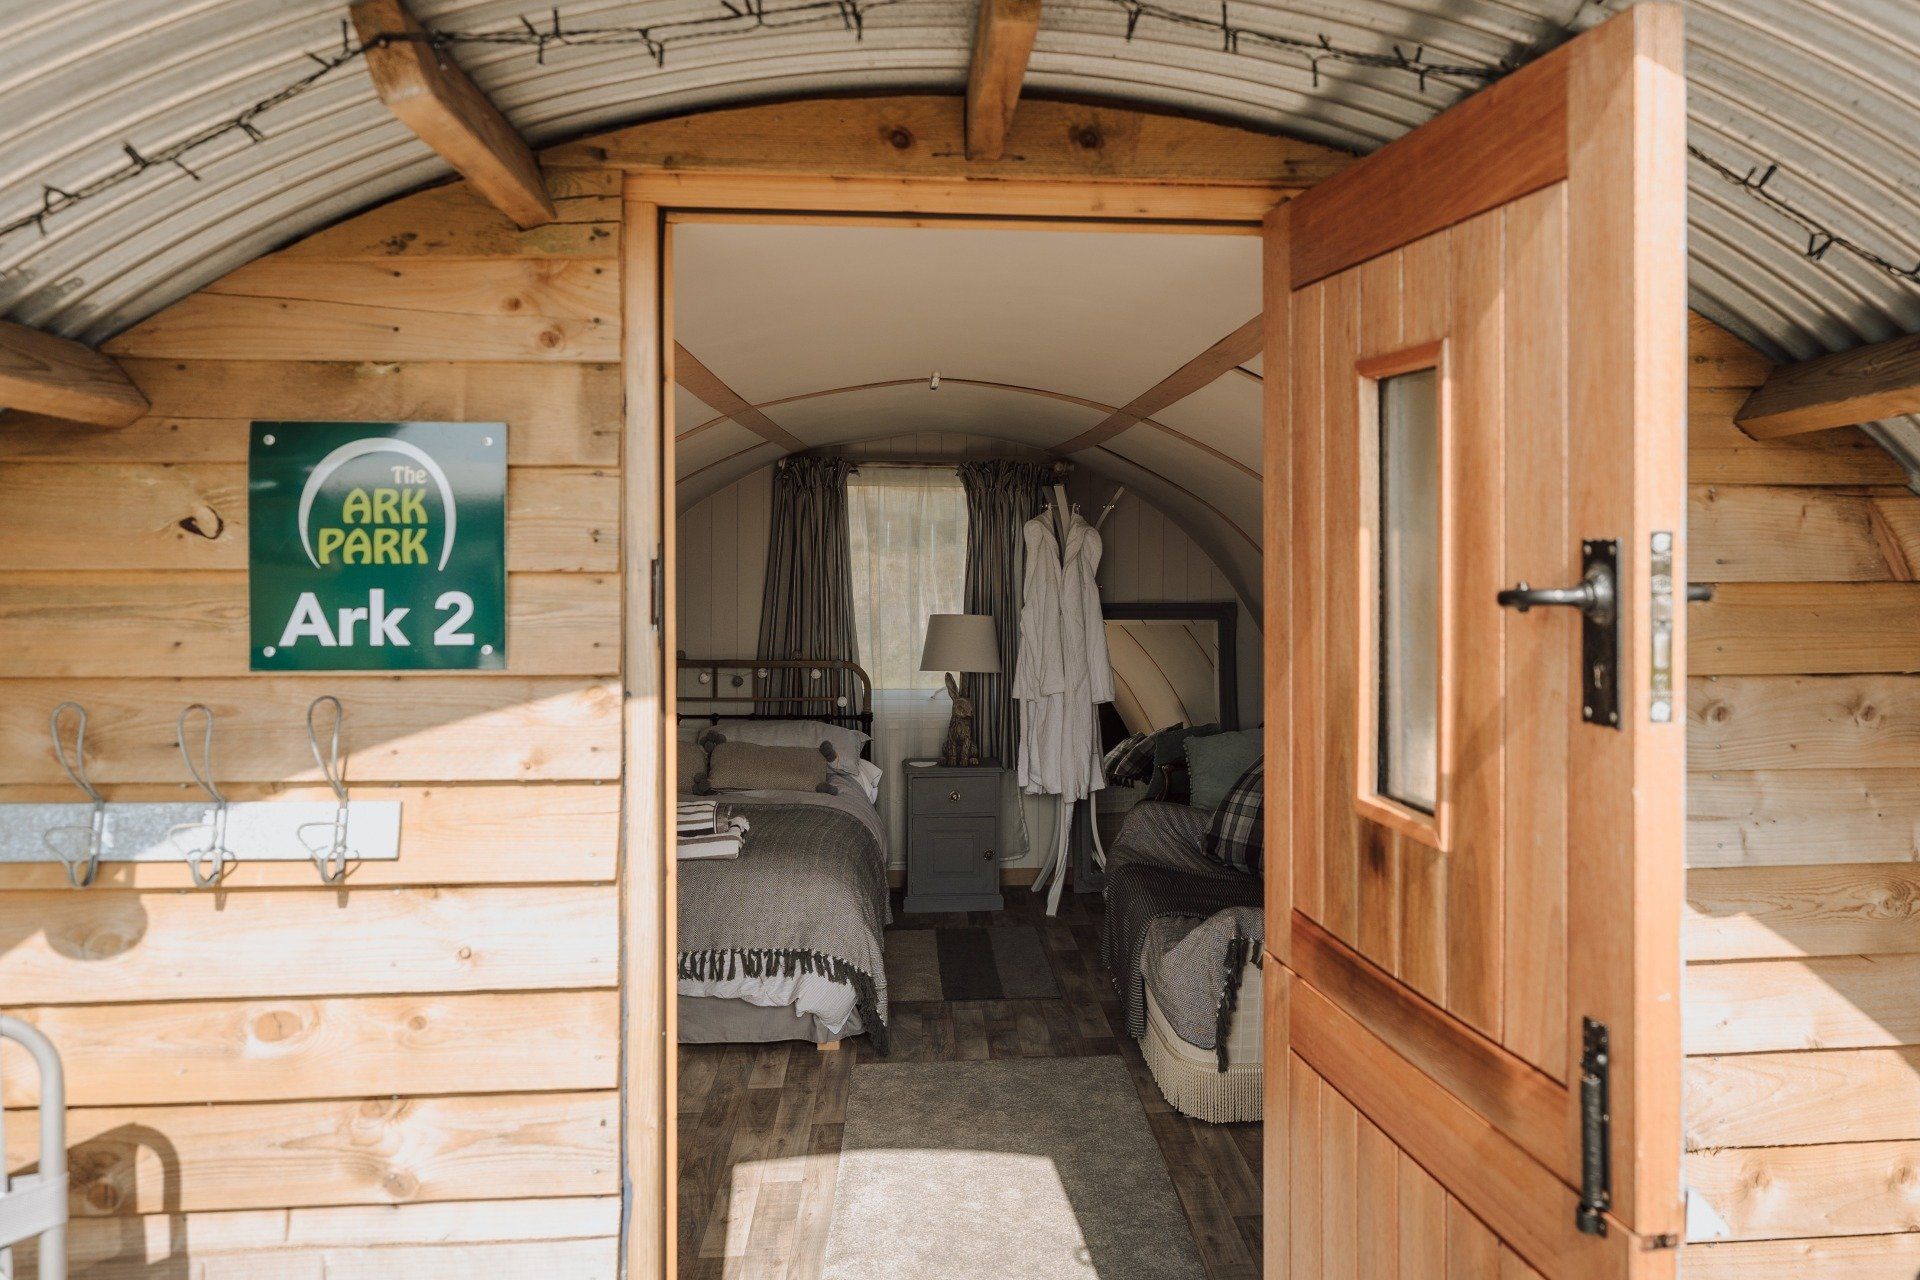 Picture of the inside of an ark camping pod near Cowes on the Isle of Wight